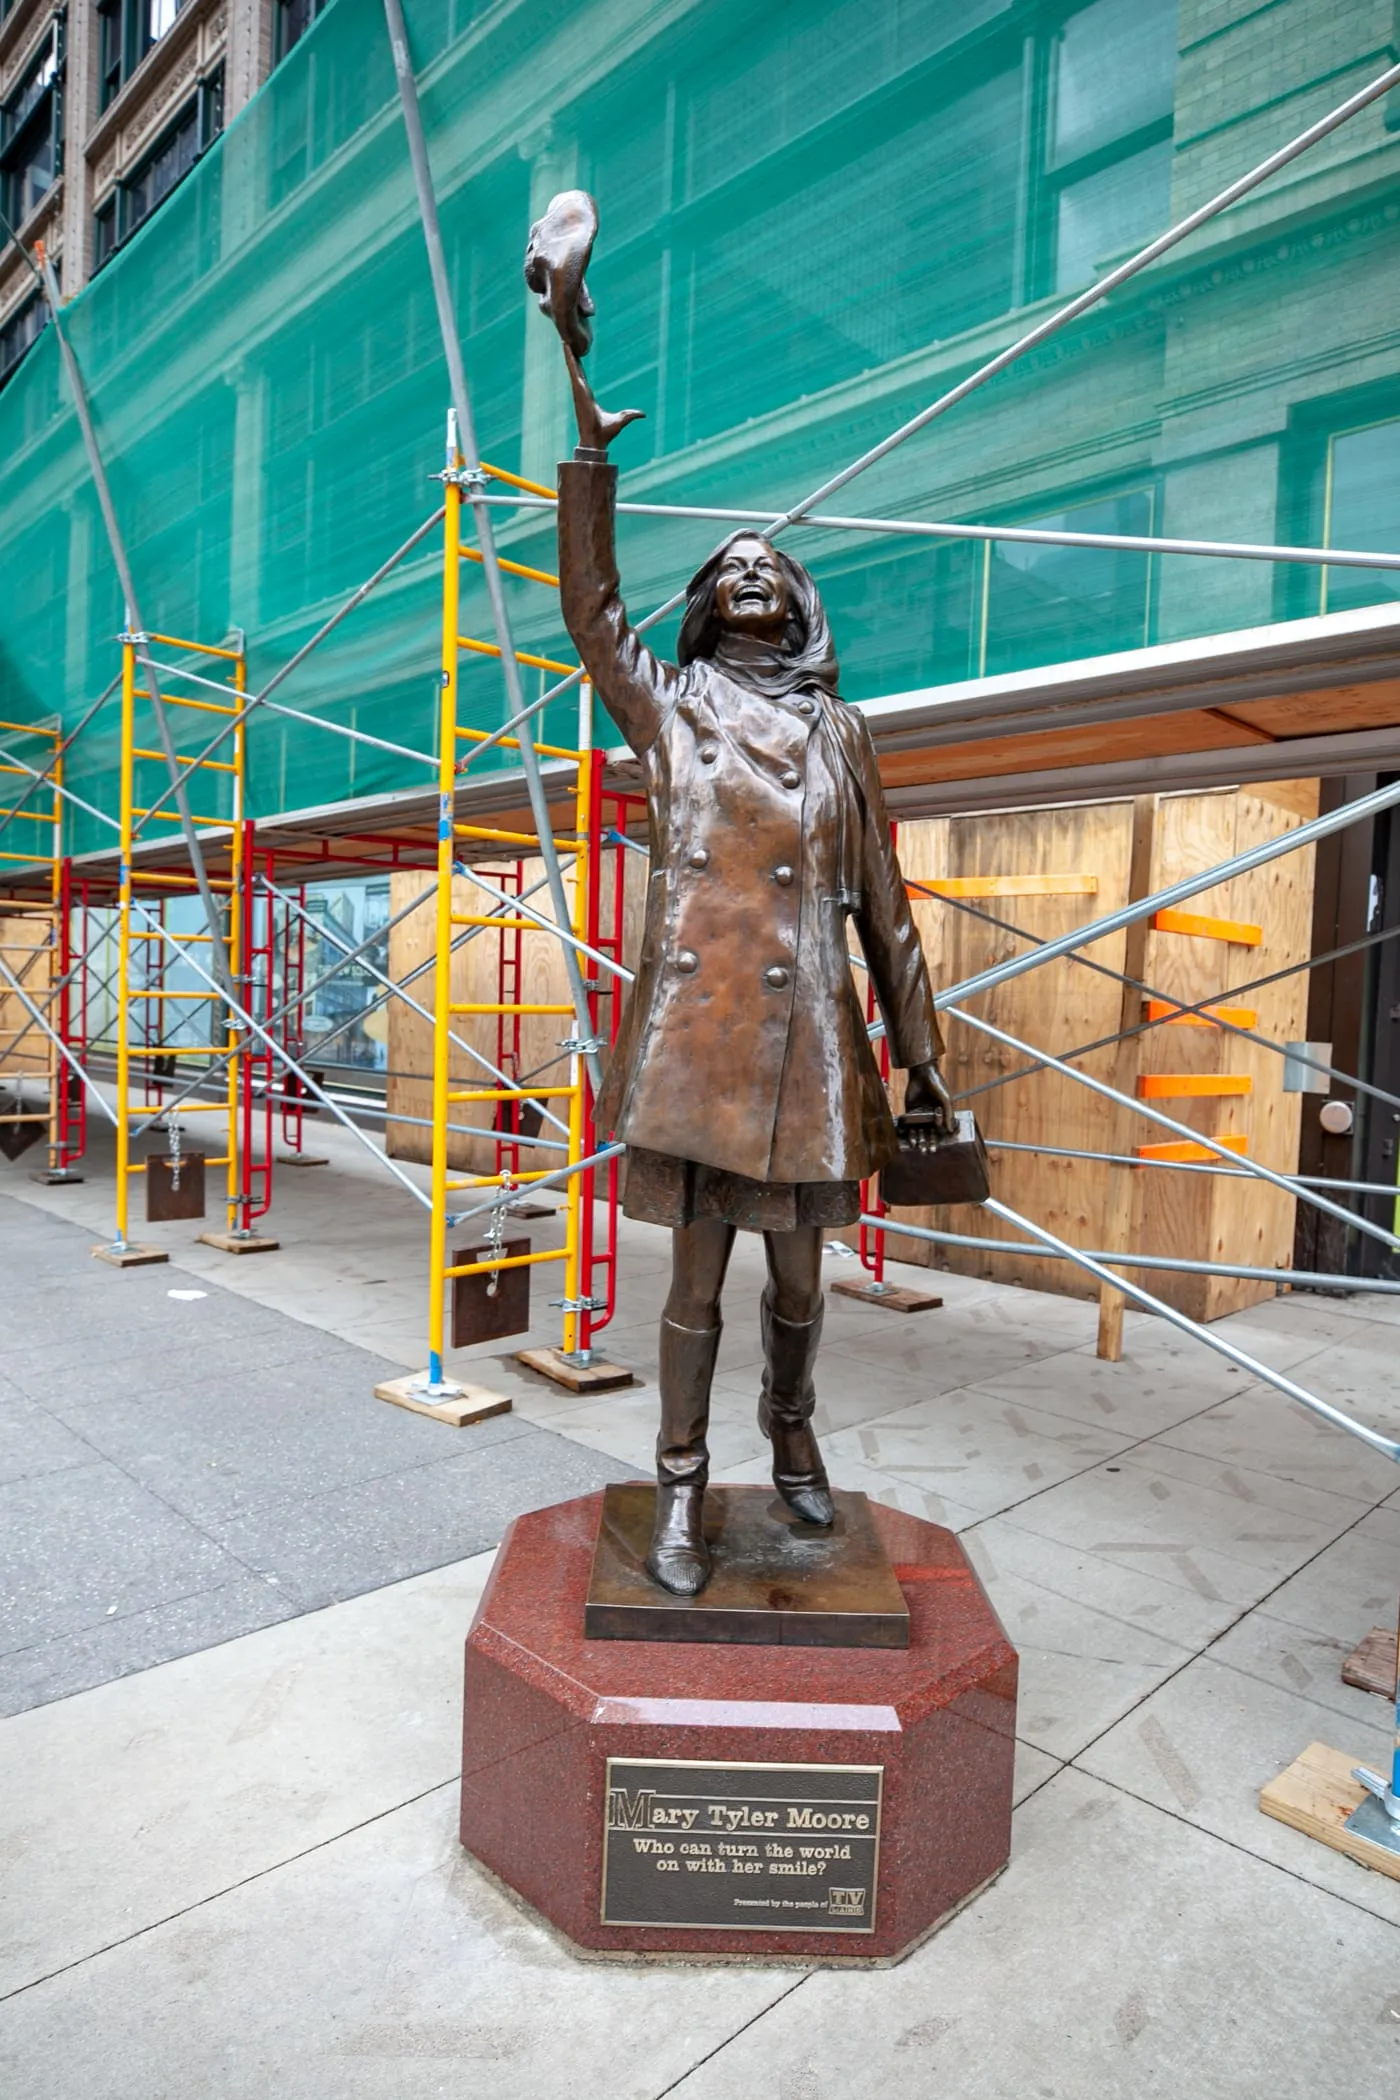 Mary Tyler Moore Statue in Minneapolis, Minnesota | Minneapolis roadside attractions in Minnesota